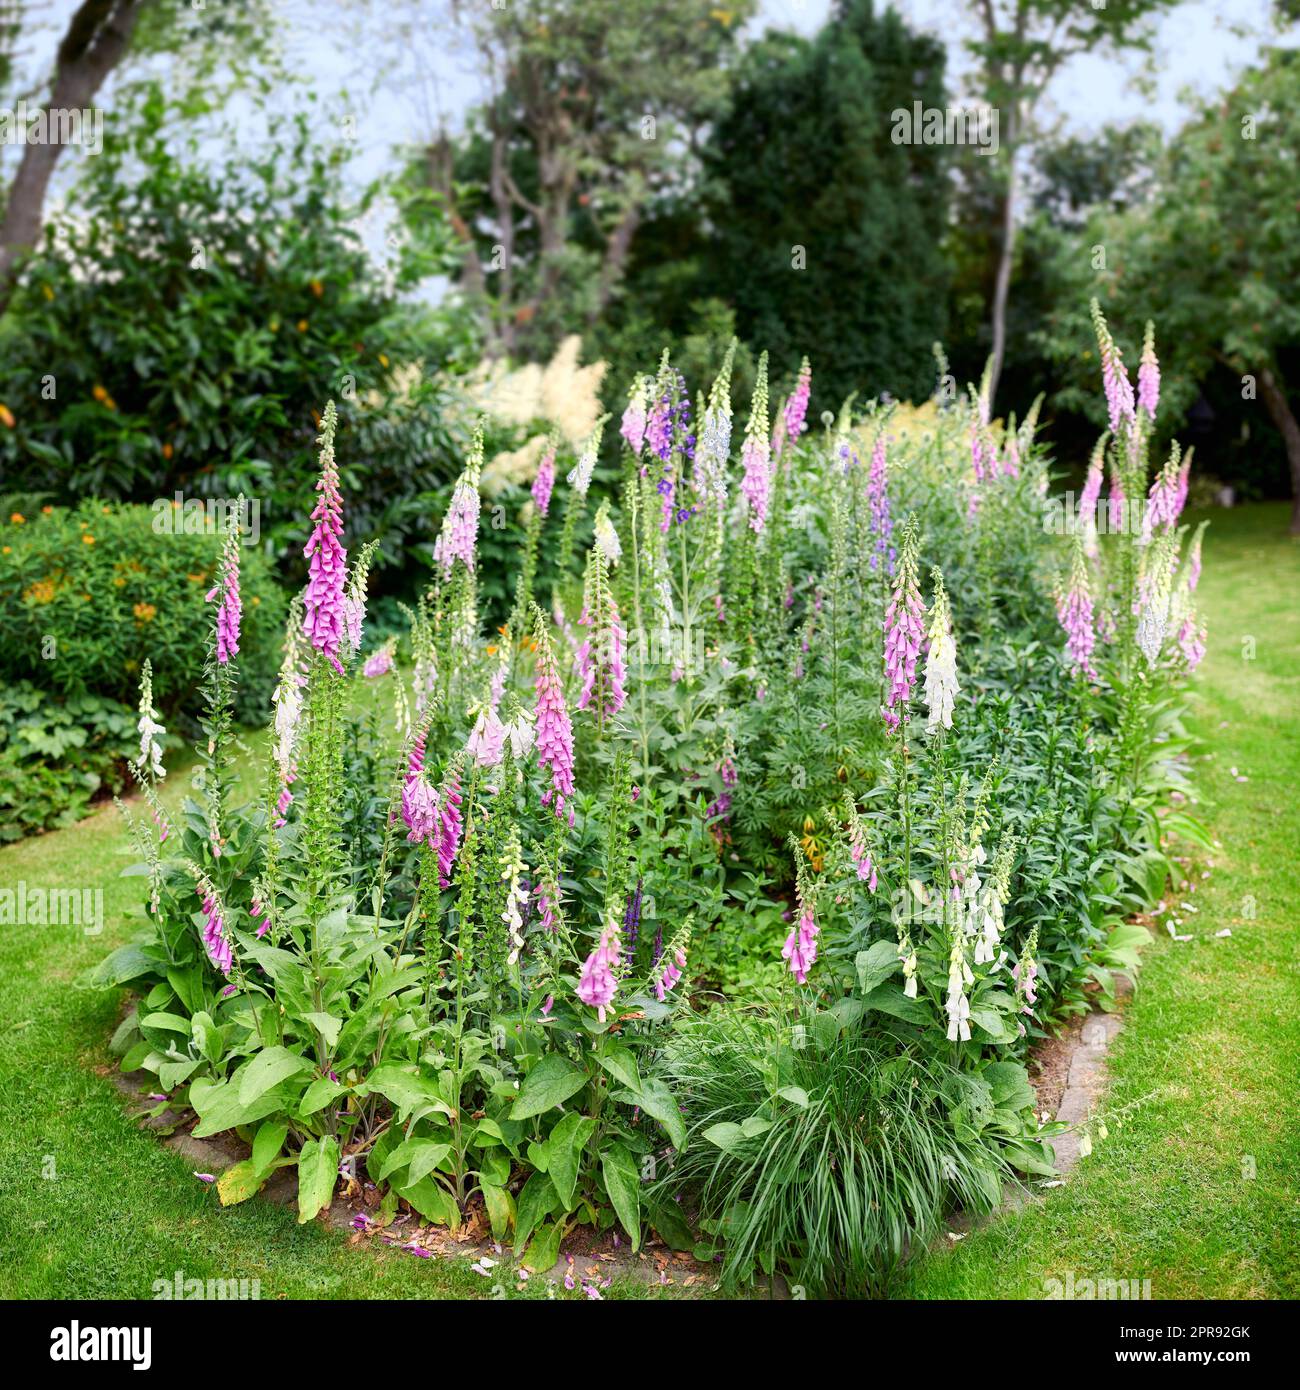 Foxglove flowers growing in a green park. Gardening perennial purple flowering plants grown as decoration in a neat garden or a well maintained backyard. Colorful flowerbed on a lawn Stock Photo